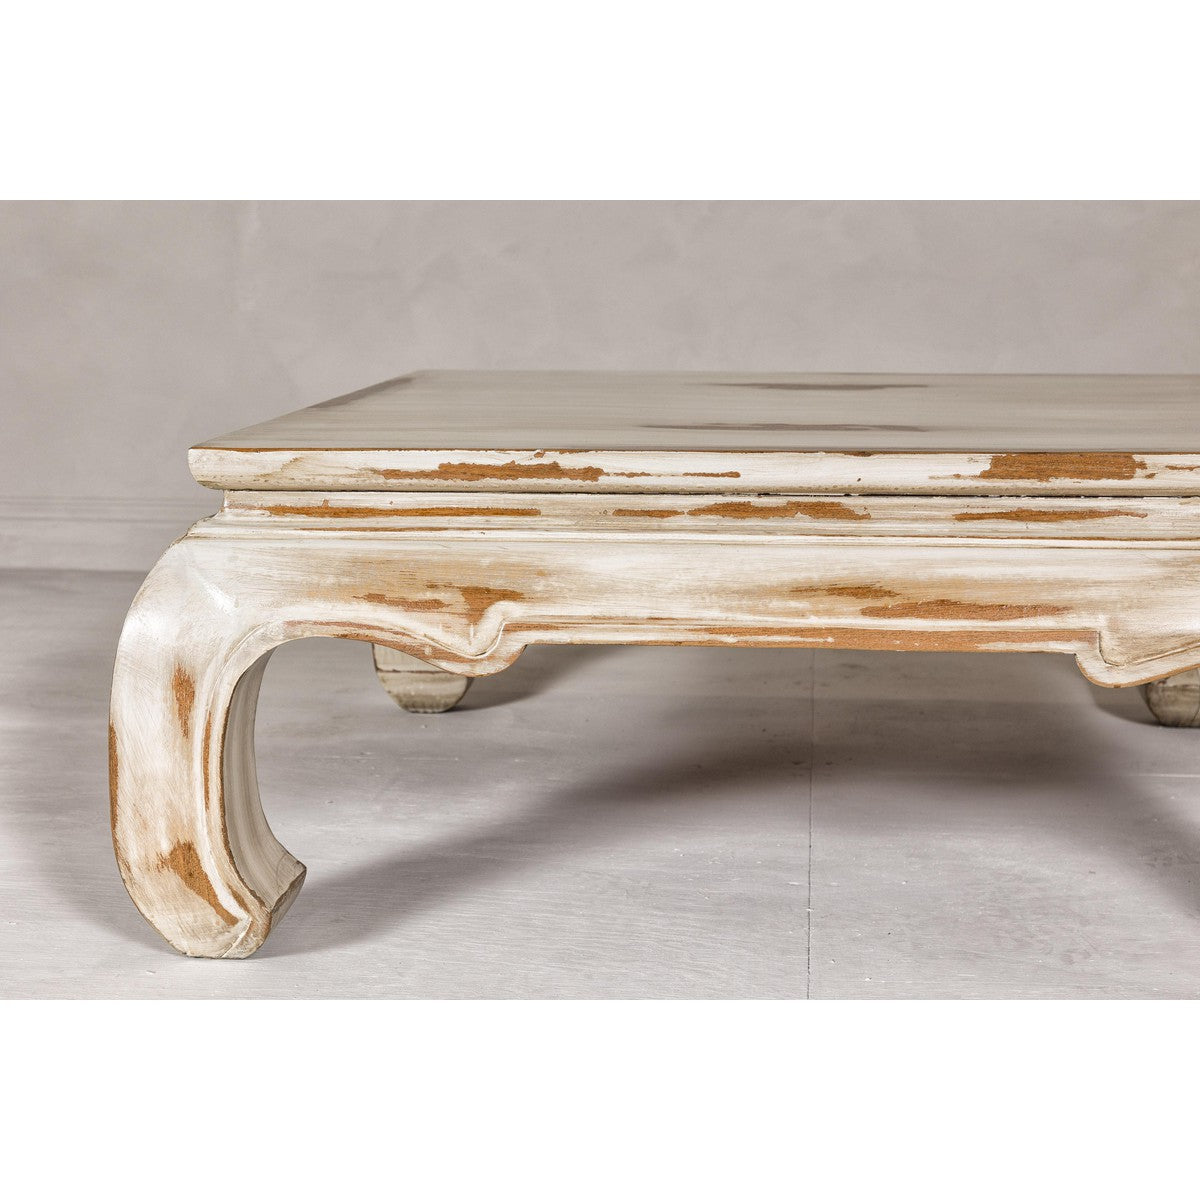 Distressed White Coffee Table with Chow Legs and Square Top, Vintage-YN7957-11. Asian & Chinese Furniture, Art, Antiques, Vintage Home Décor for sale at FEA Home